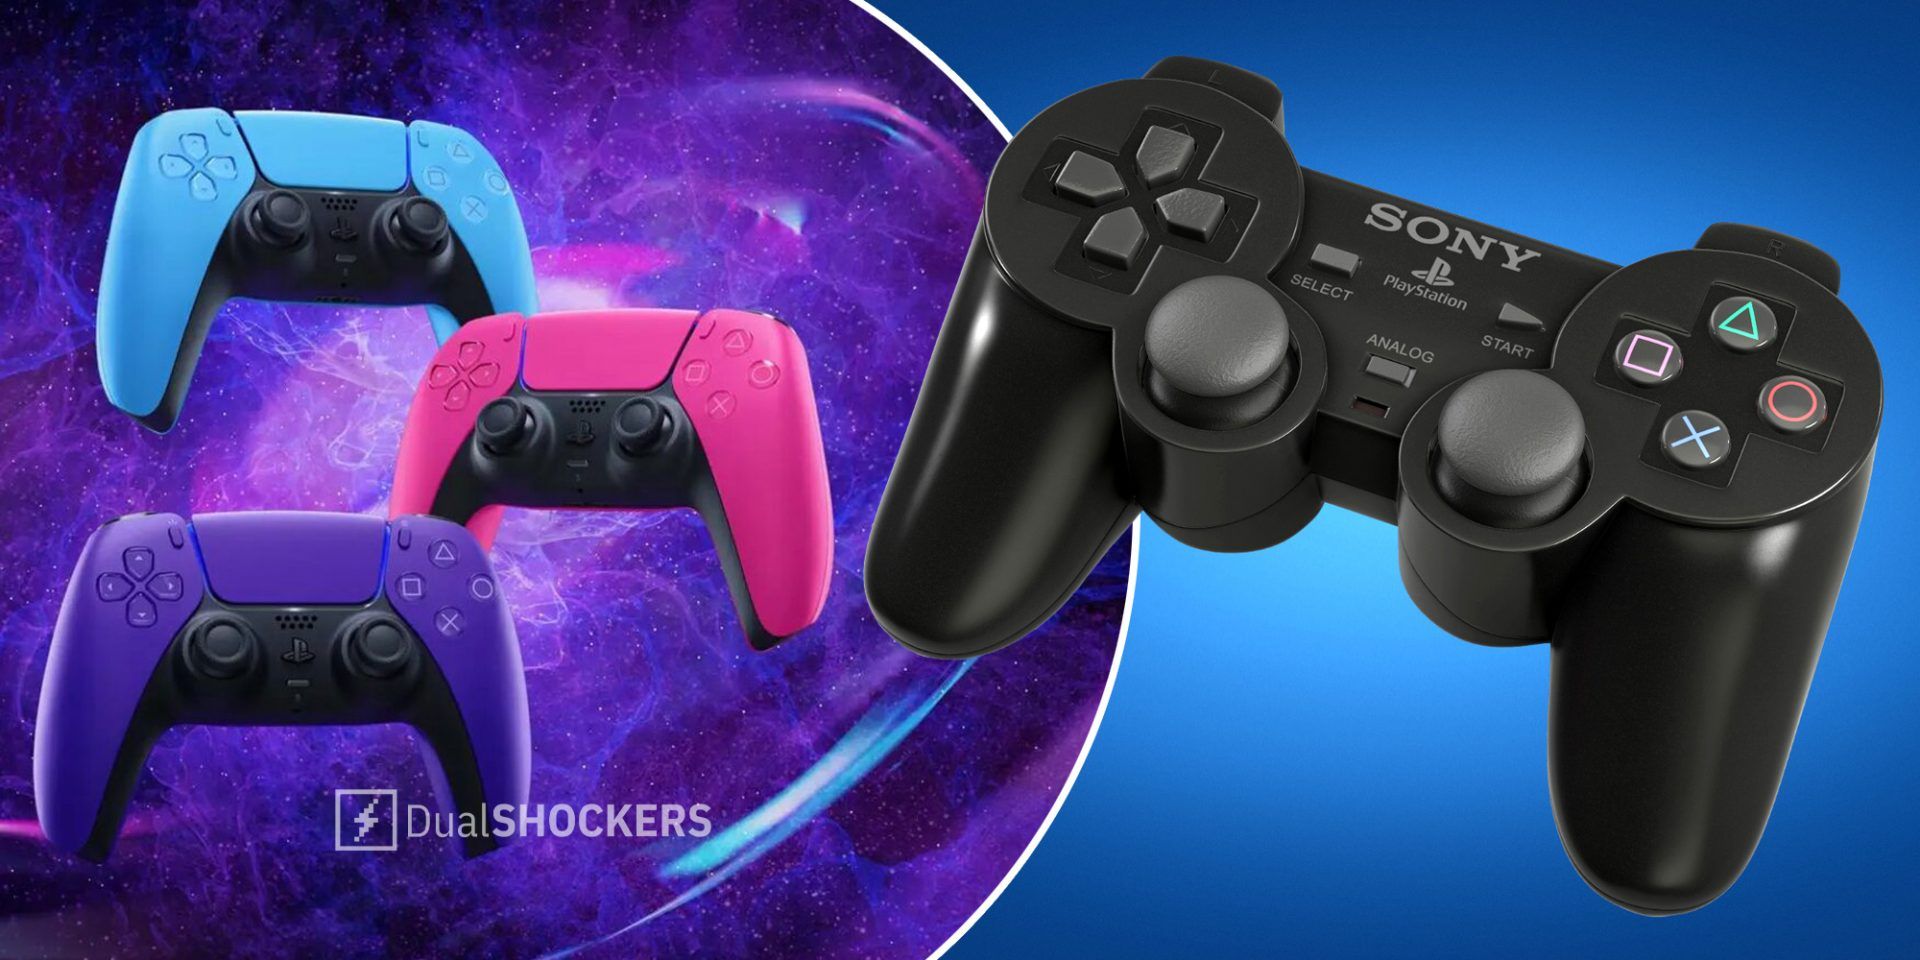 Playstation 5 DualSense controller in blue, purple, and pink on left, Playstation 2 controller in black on right